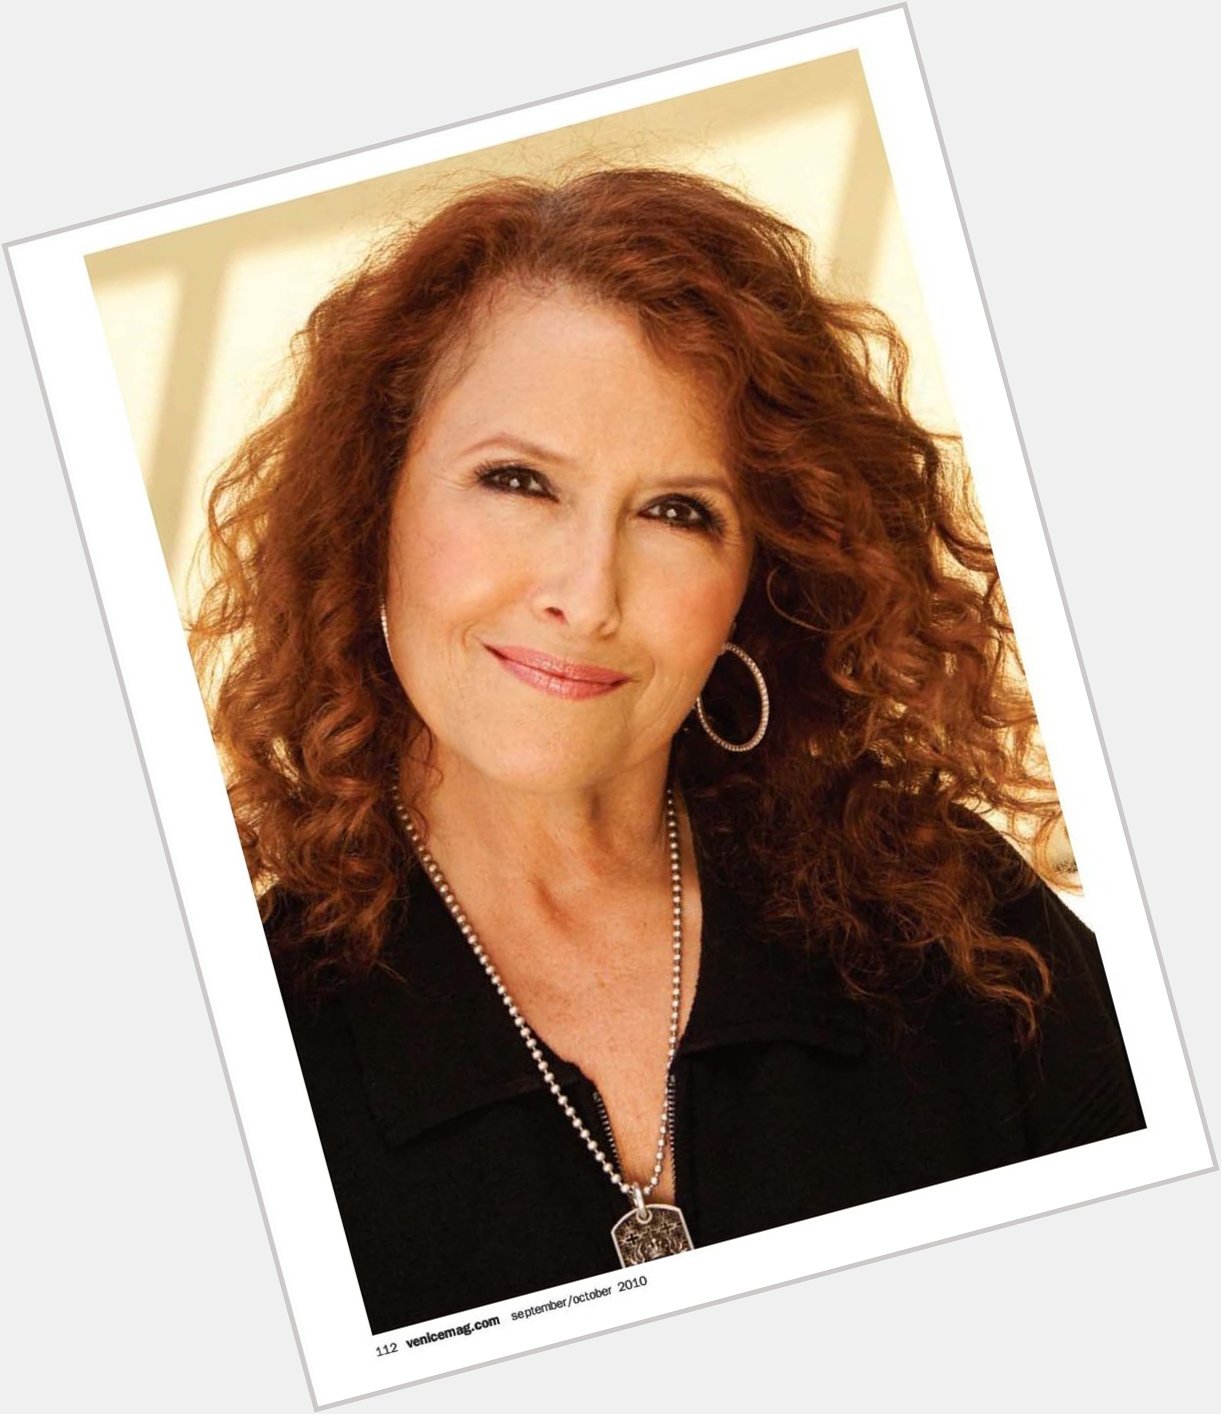 A Big BOSS Happy Birthday today to Melissa Manchester from all of us at Boss Boss Radio! 